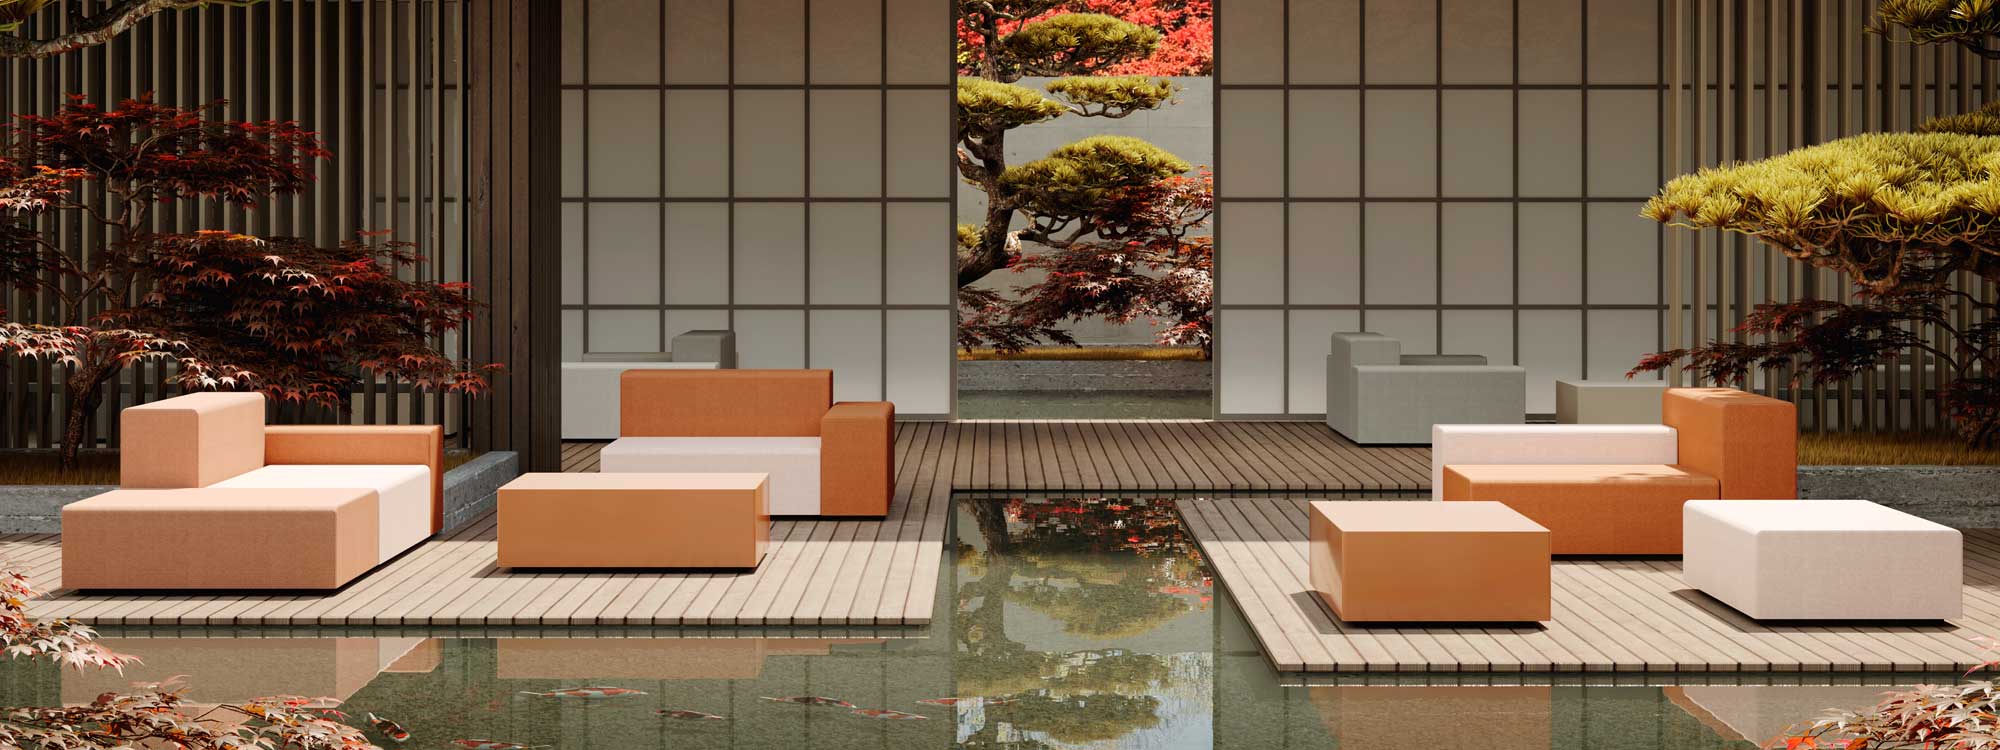 Image of 2 Elements modular garden sofas on wooden decks, hovering just above water, with cloud pruned fir trees, acer trees and Japanese screen in background